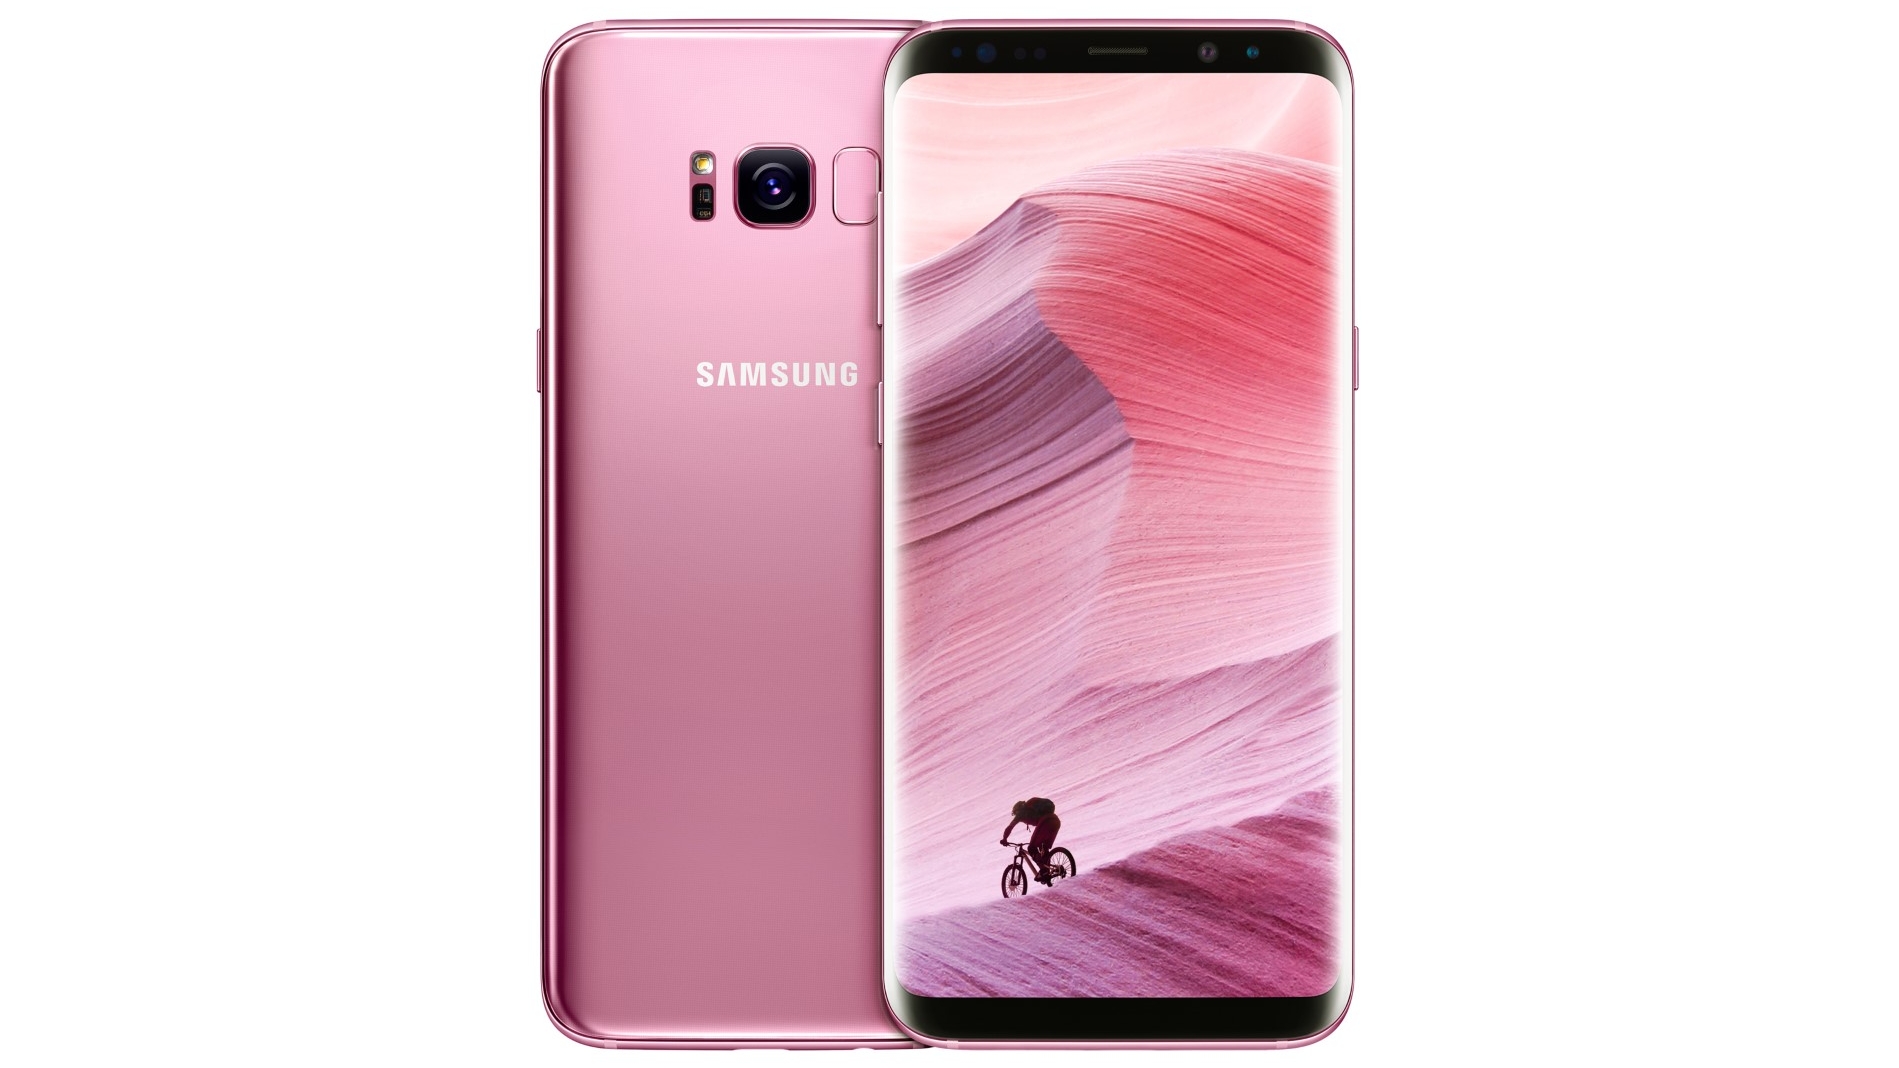 Rose pink Galaxy S8 and S8 Plus now available in the UK TechRadar